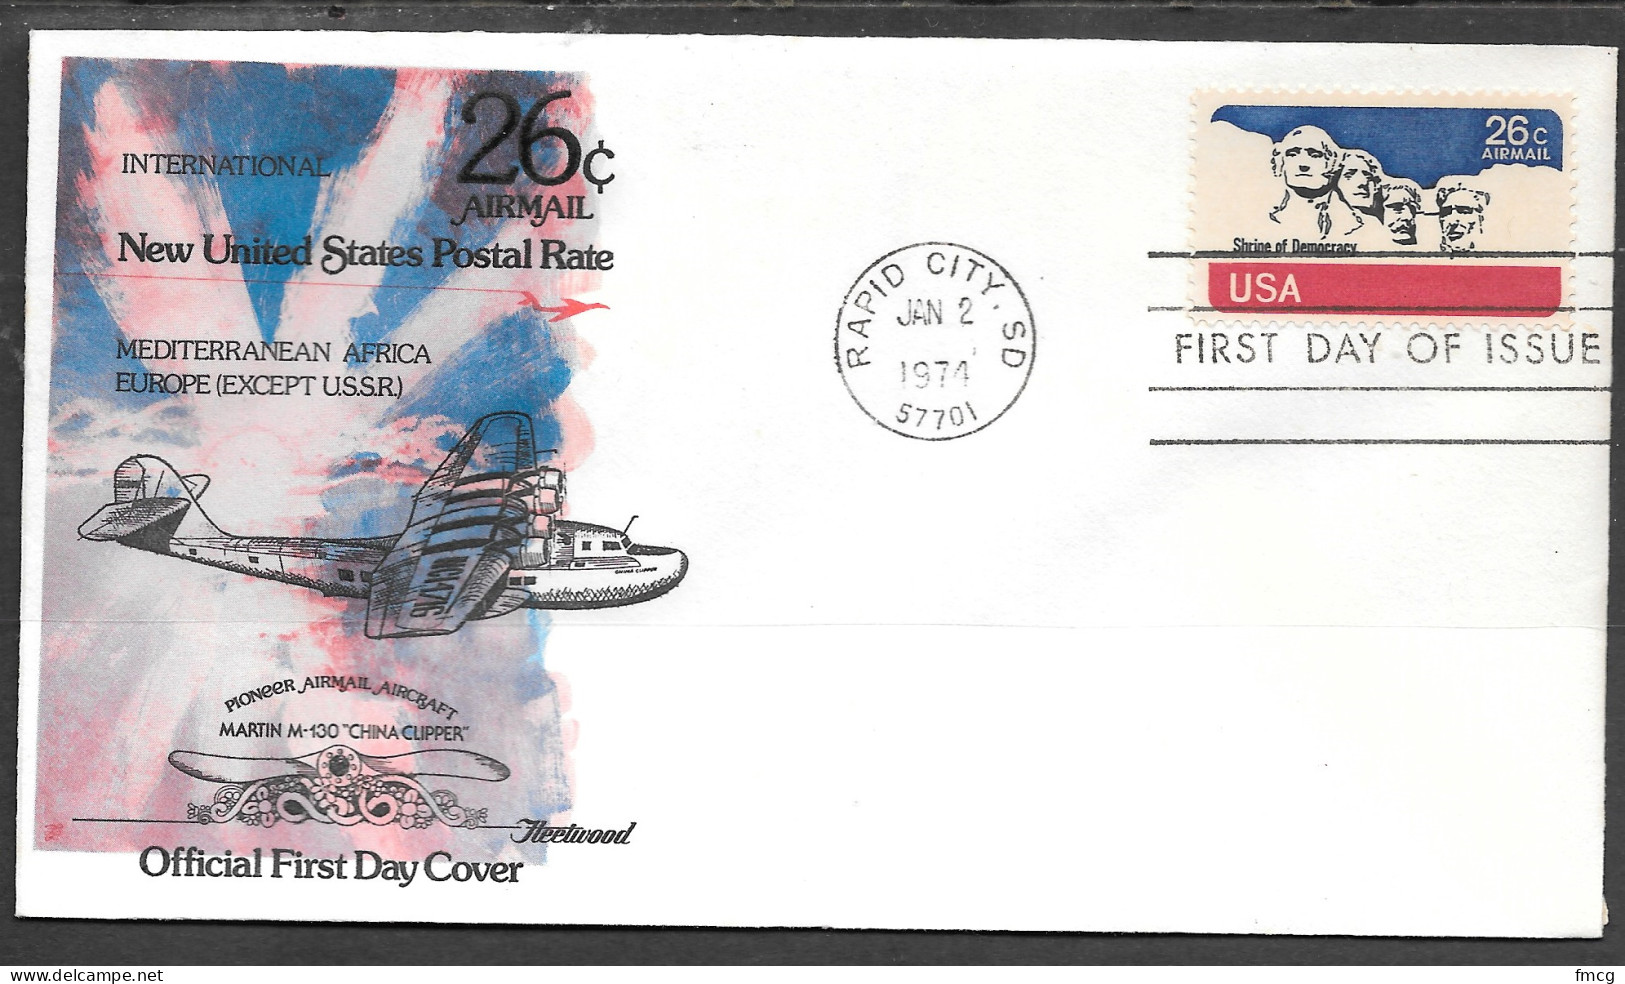 USA FDC Fleetwood Cachet, 1974 26 Cents Mount Rushmore Airmail - 1971-1980